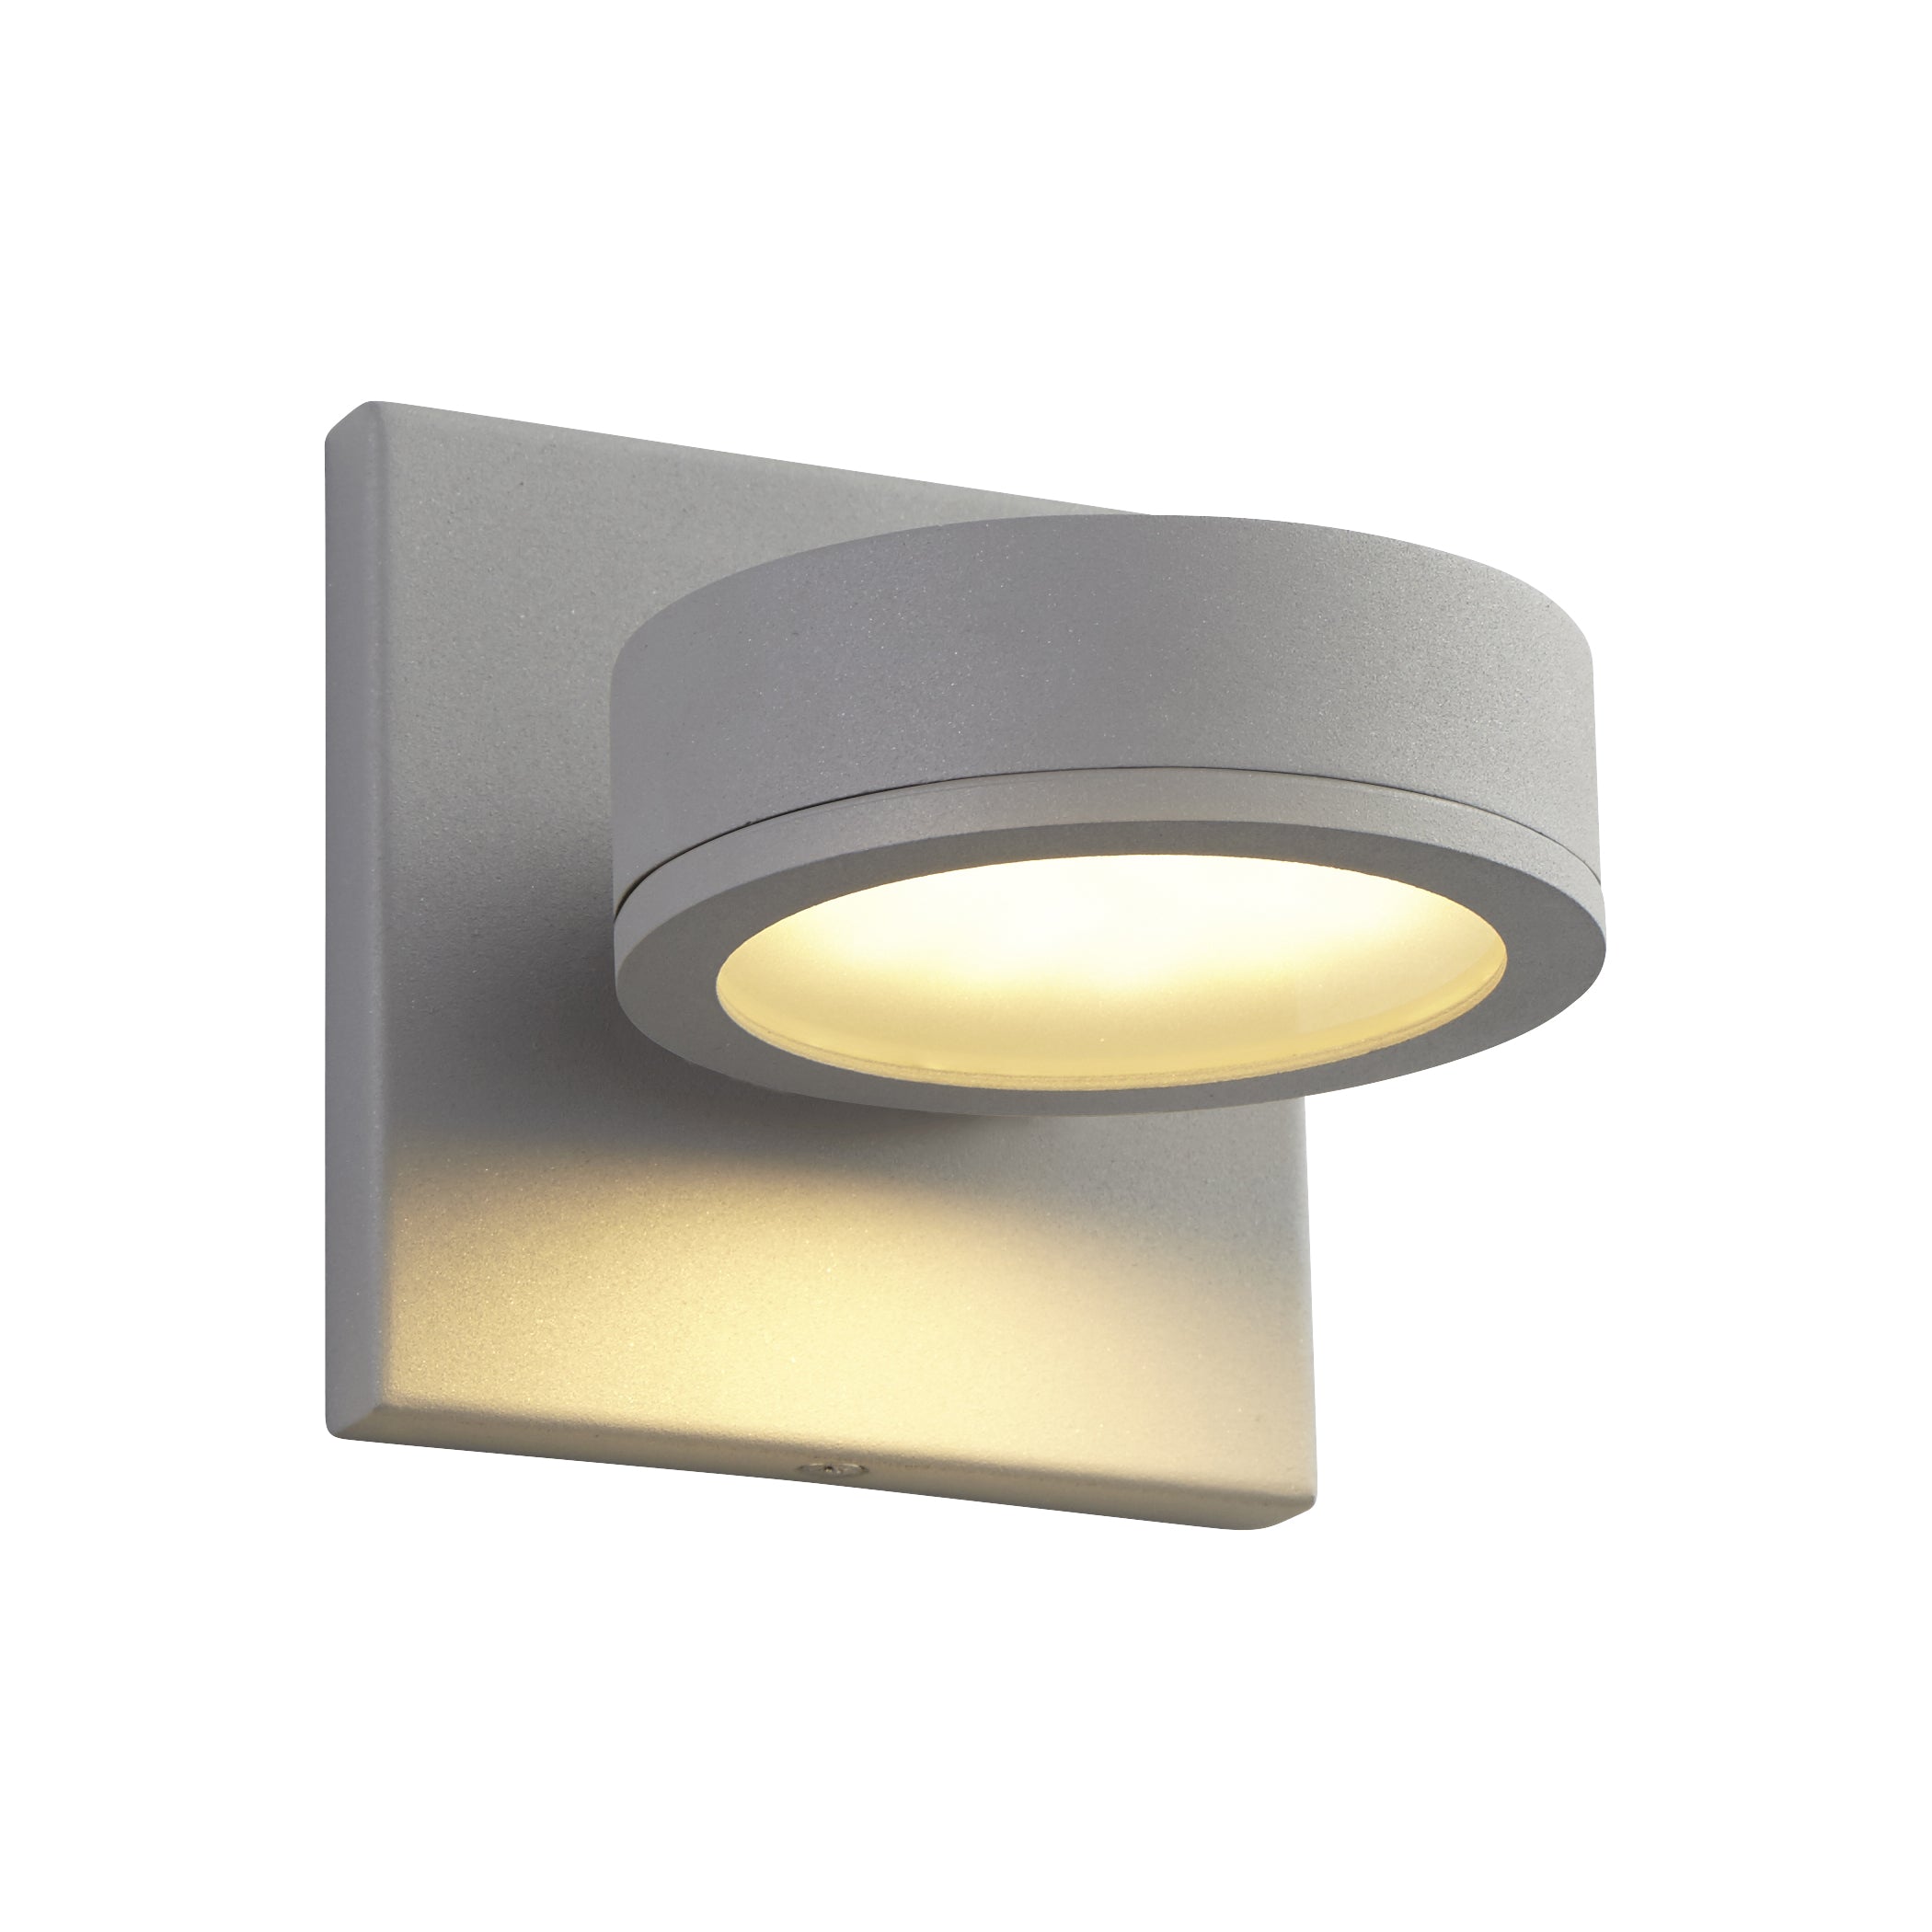 Oxygen Ceres 3-726-16 Outdoor Wall Sconce Light - Grey